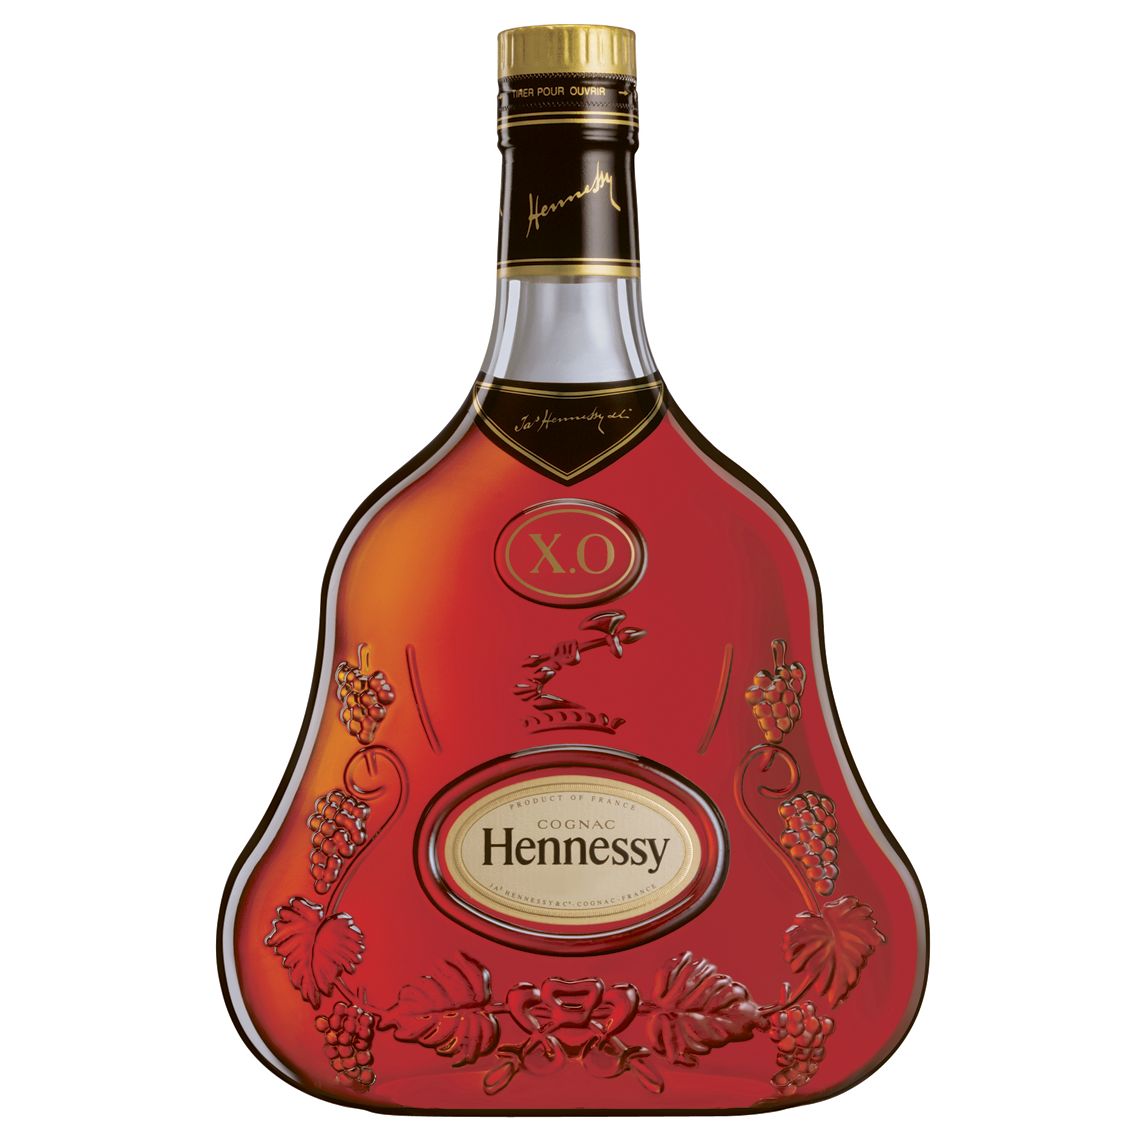 Hennessy XO Cognac at JohnLewis